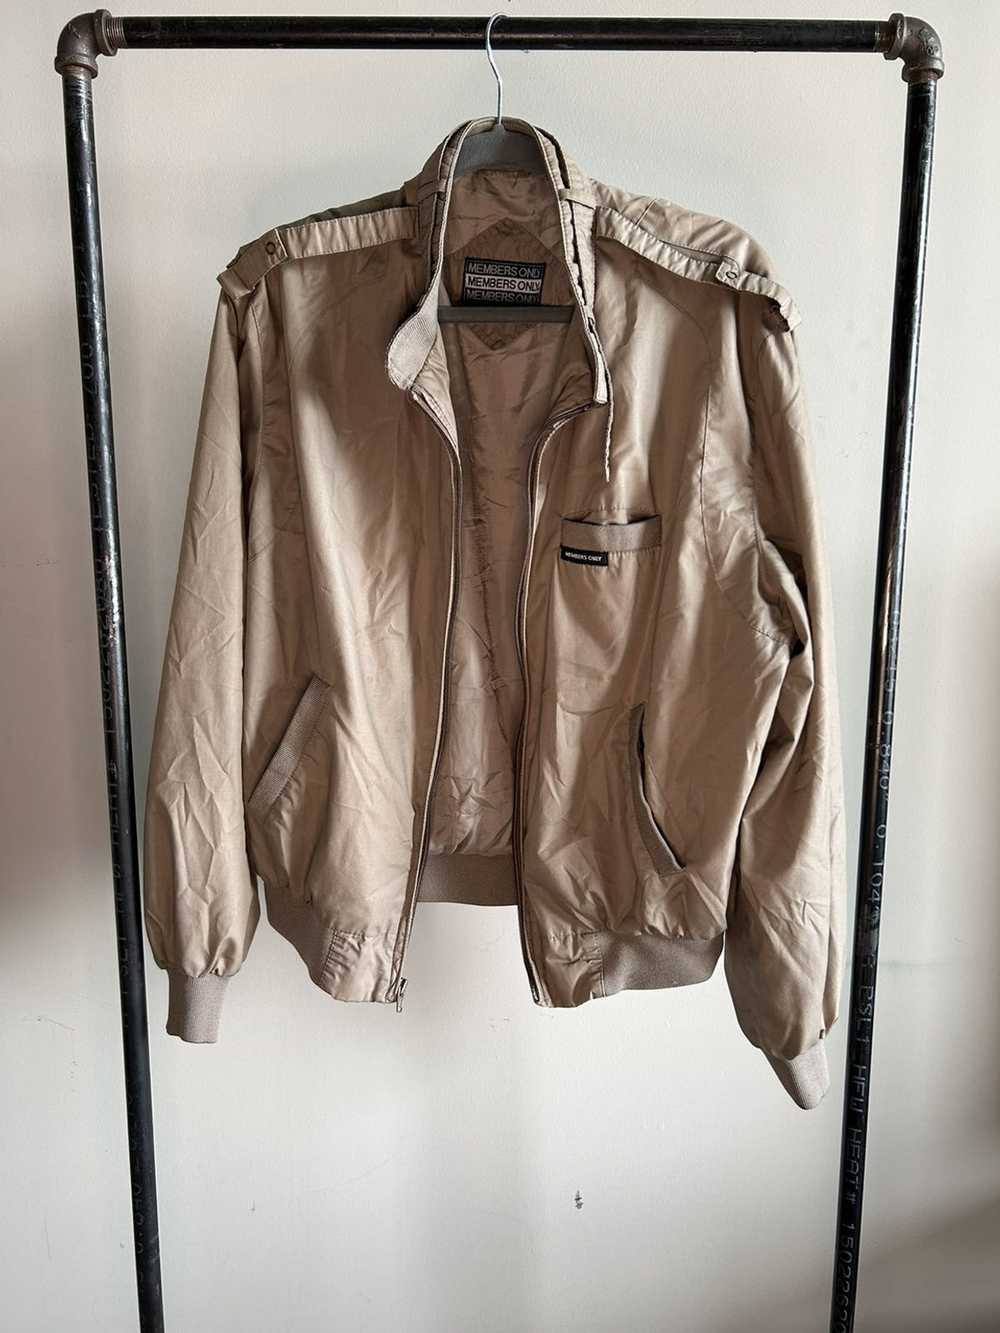 Members Only Members only Racer Jacket - image 3